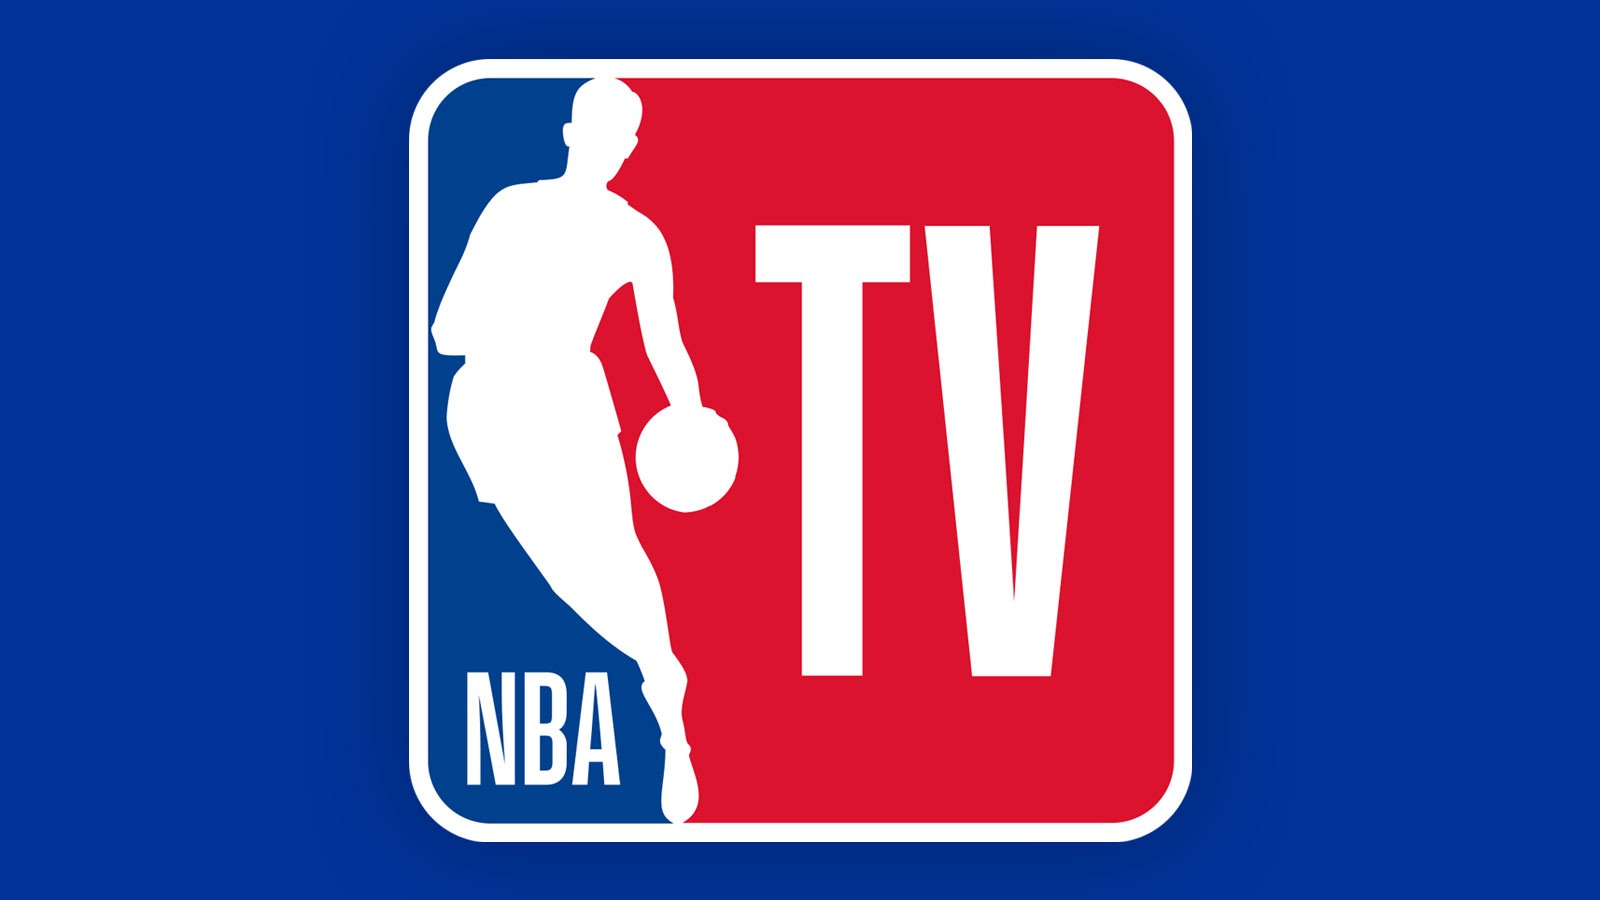 NBA TV to Exclusively Televise 2022 Naismith Memorial Basketball Hall of Fame Class Enshrinement and Red Carpet Show on Saturday, Sept. 10, Starting at 6 p.m